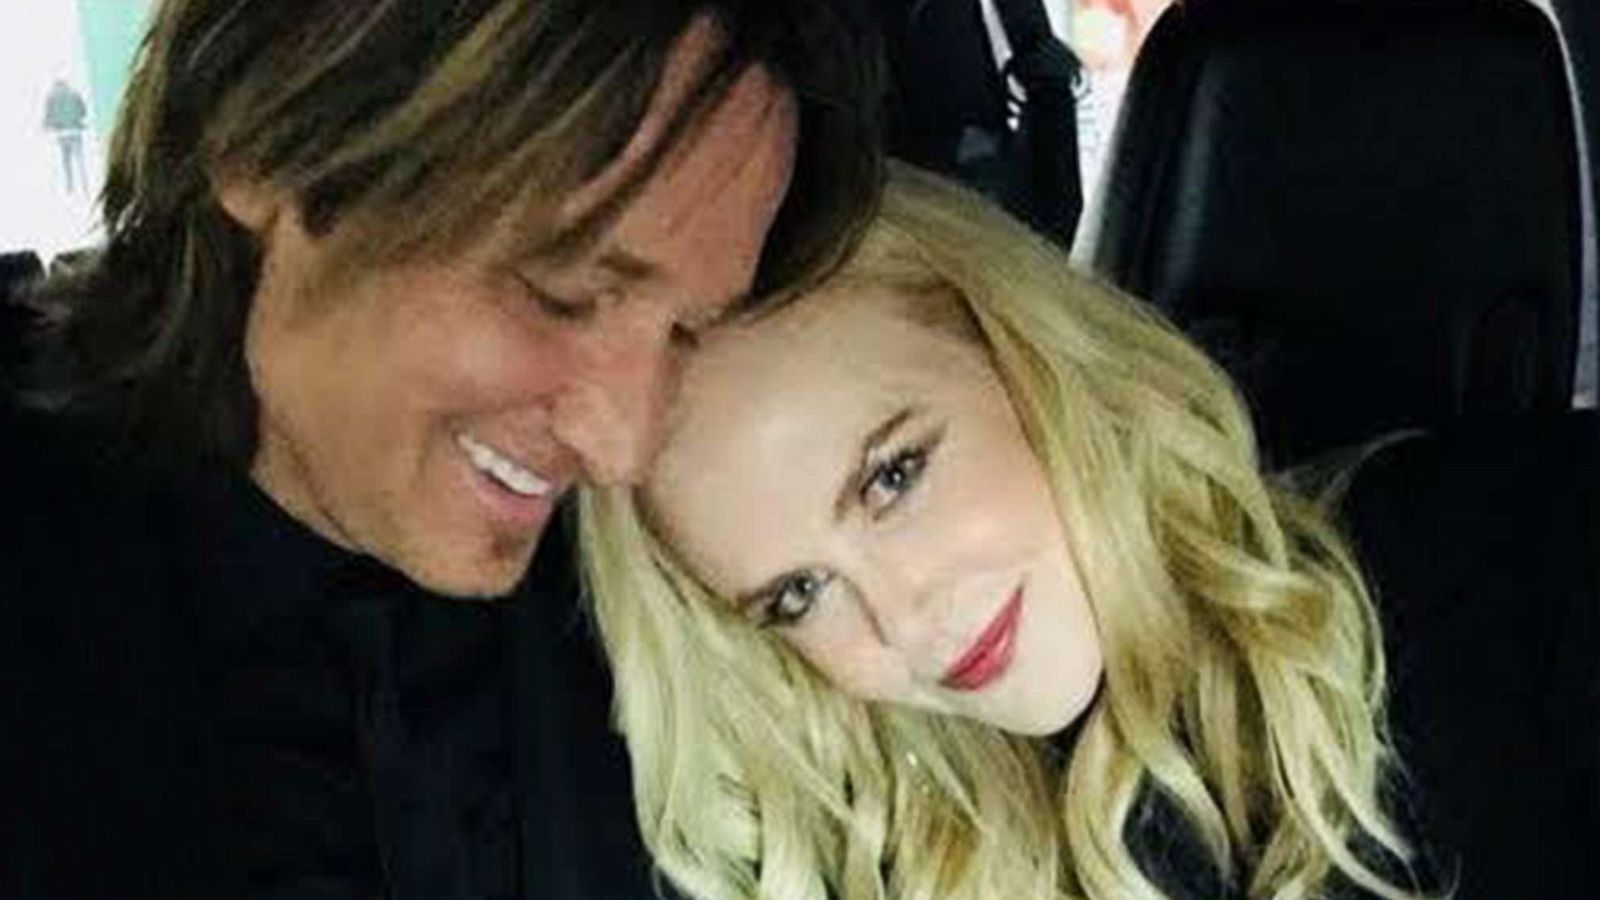 PHOTO: Keith Urban and Nicole Kidman are pictured in a photo shared to Urban's Twitter account on Feb. 14, 2021, with the text, "16 Valentines...and it only gets sweeter !!! Happy Valentine's Day Babygirl xxxx."